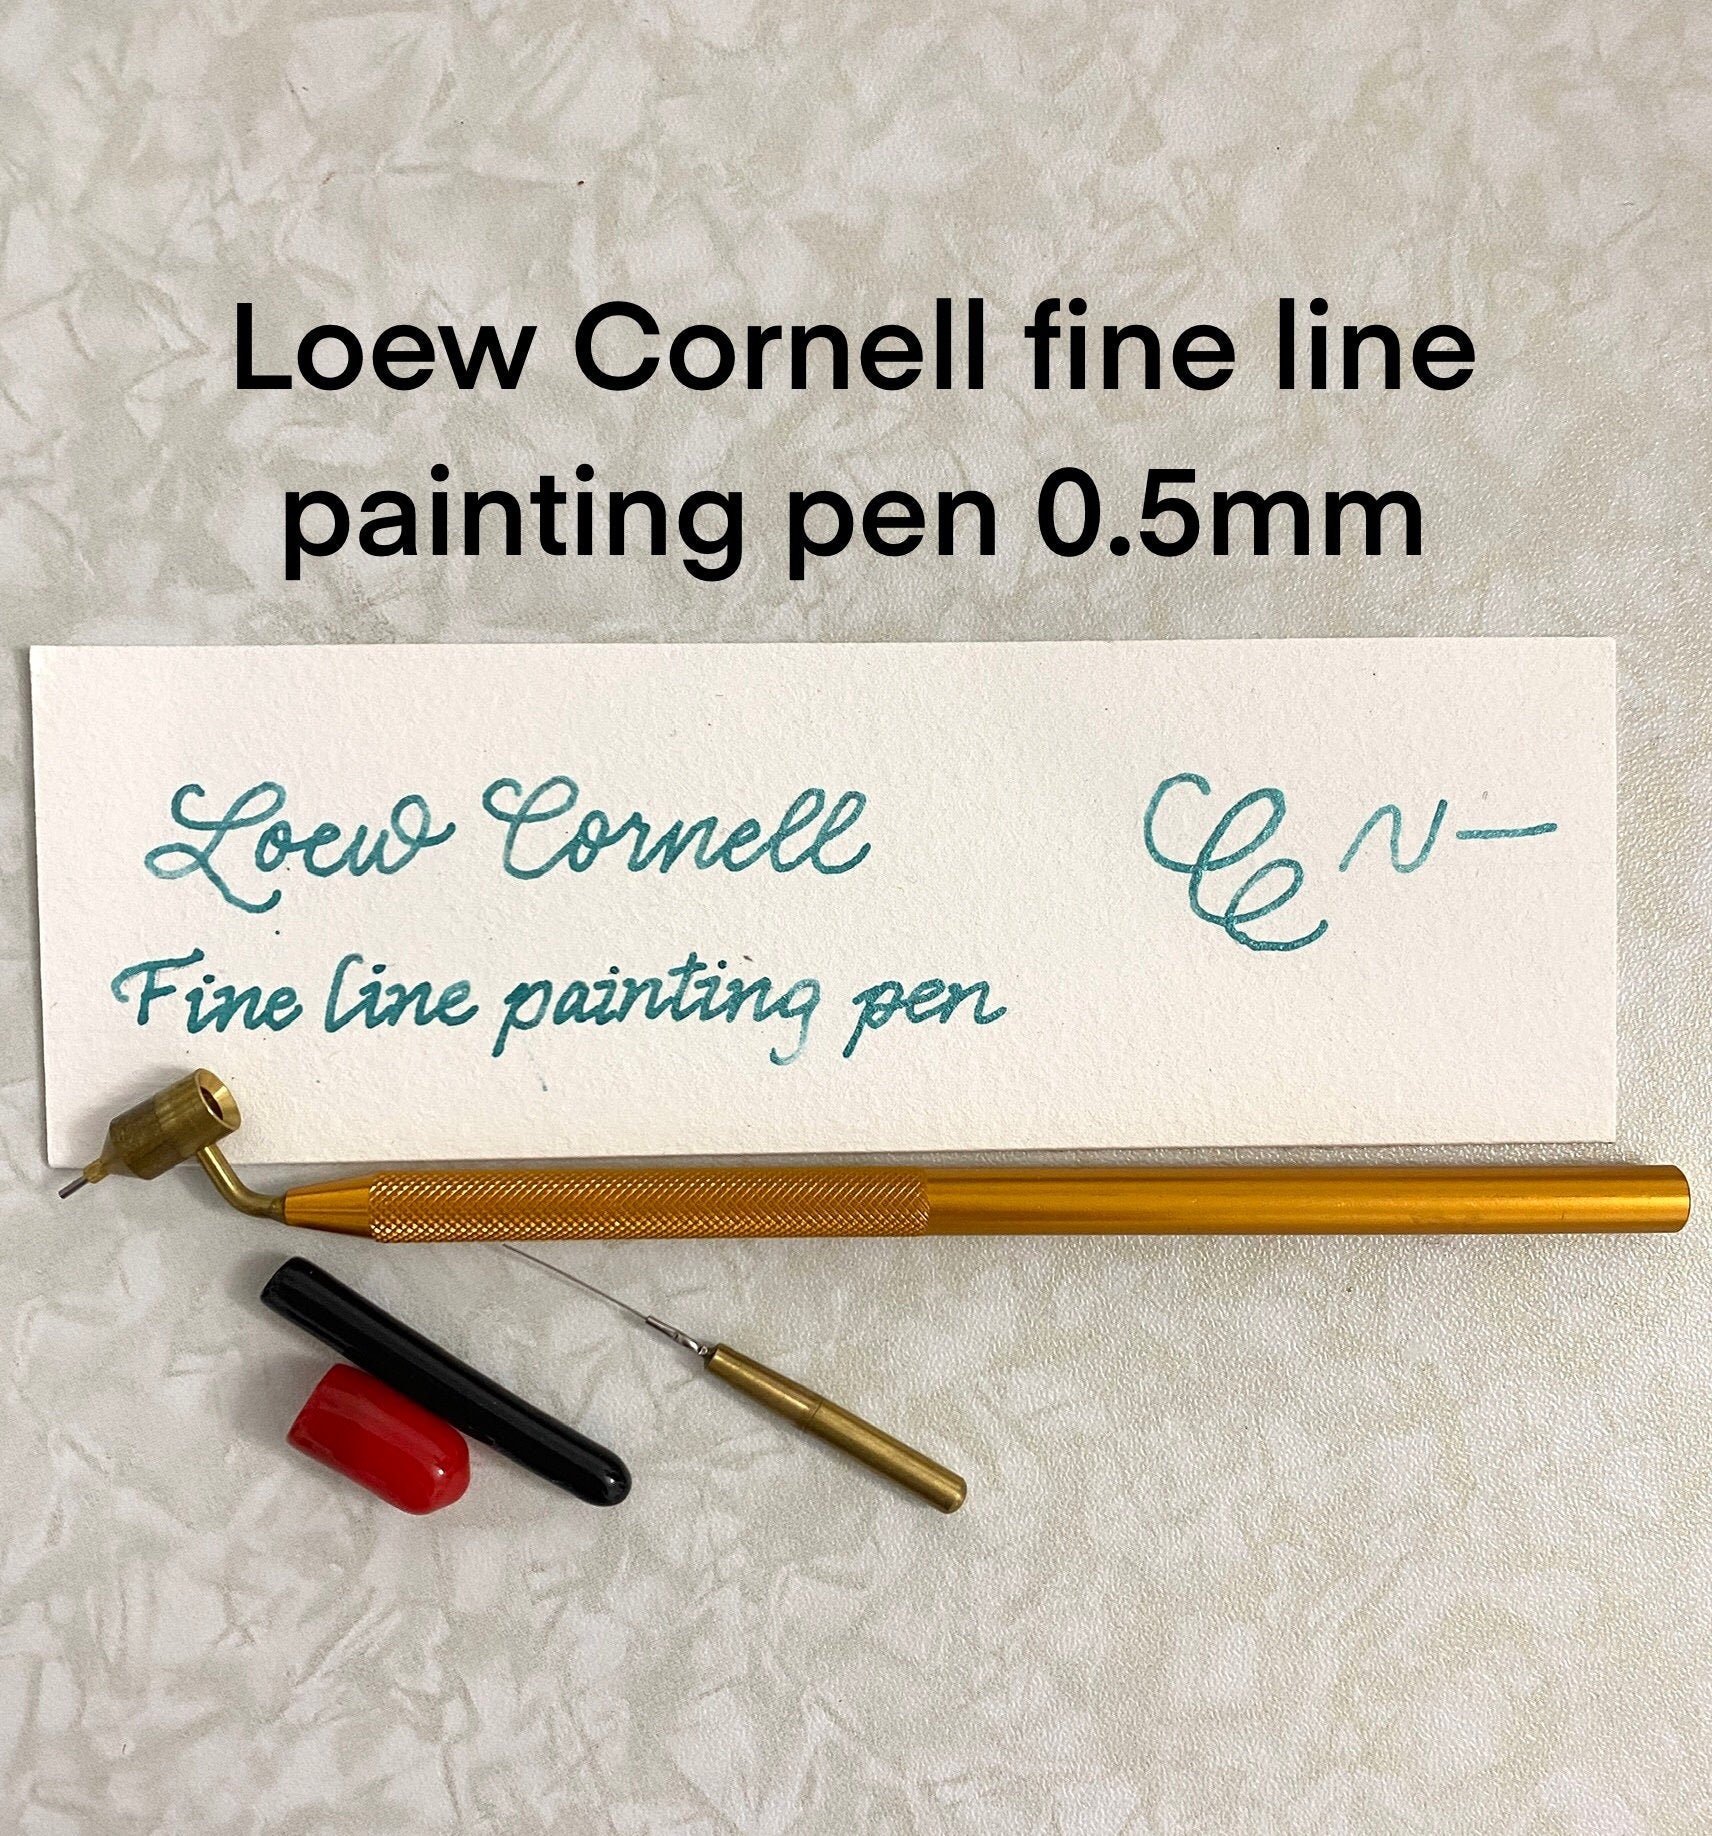 Loew-Cornell Fine Line Painting Pen Perfect MYTODDLER New 